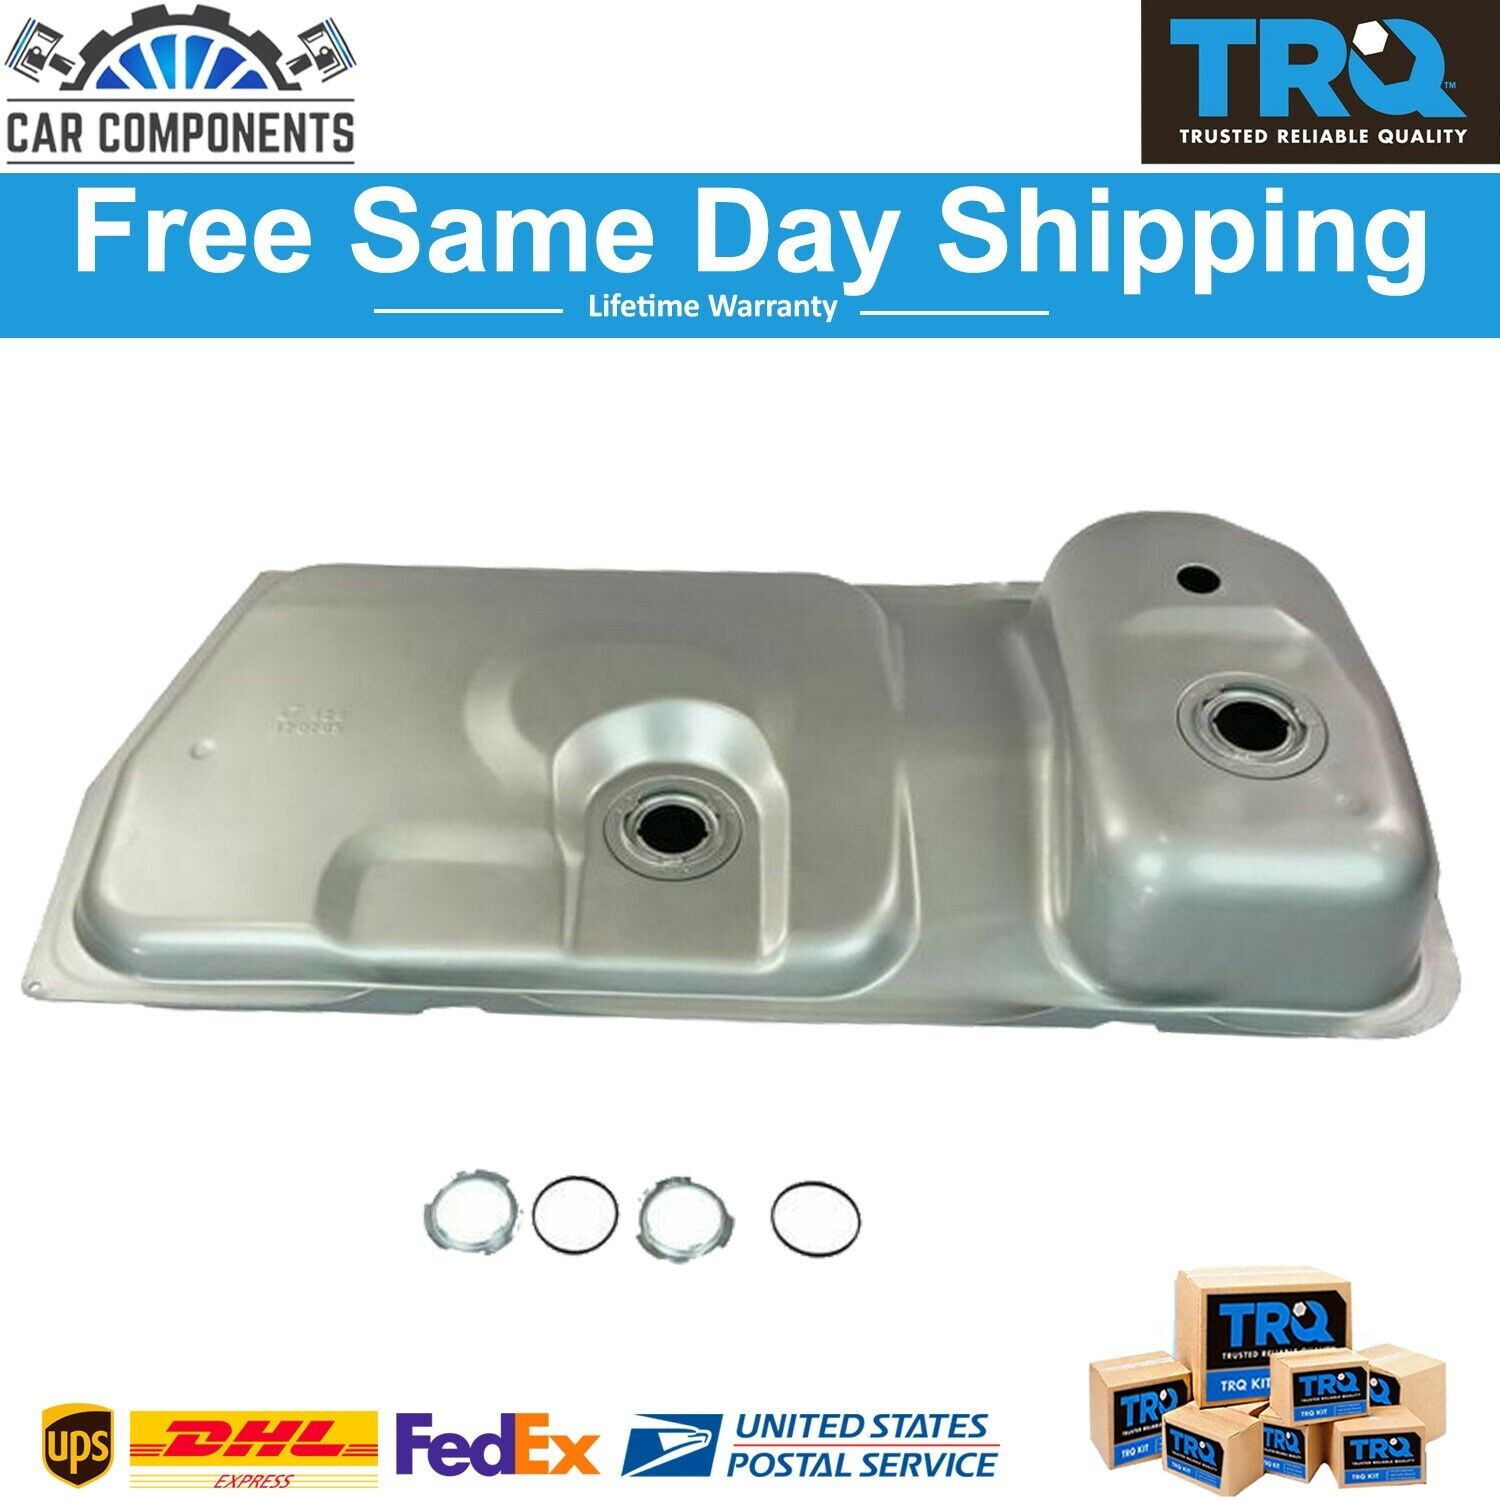 TRQ New Fuel Gas Tank 15.4 Gallon For 83-97 Ford Mustang Capri w/ Fuel Injection